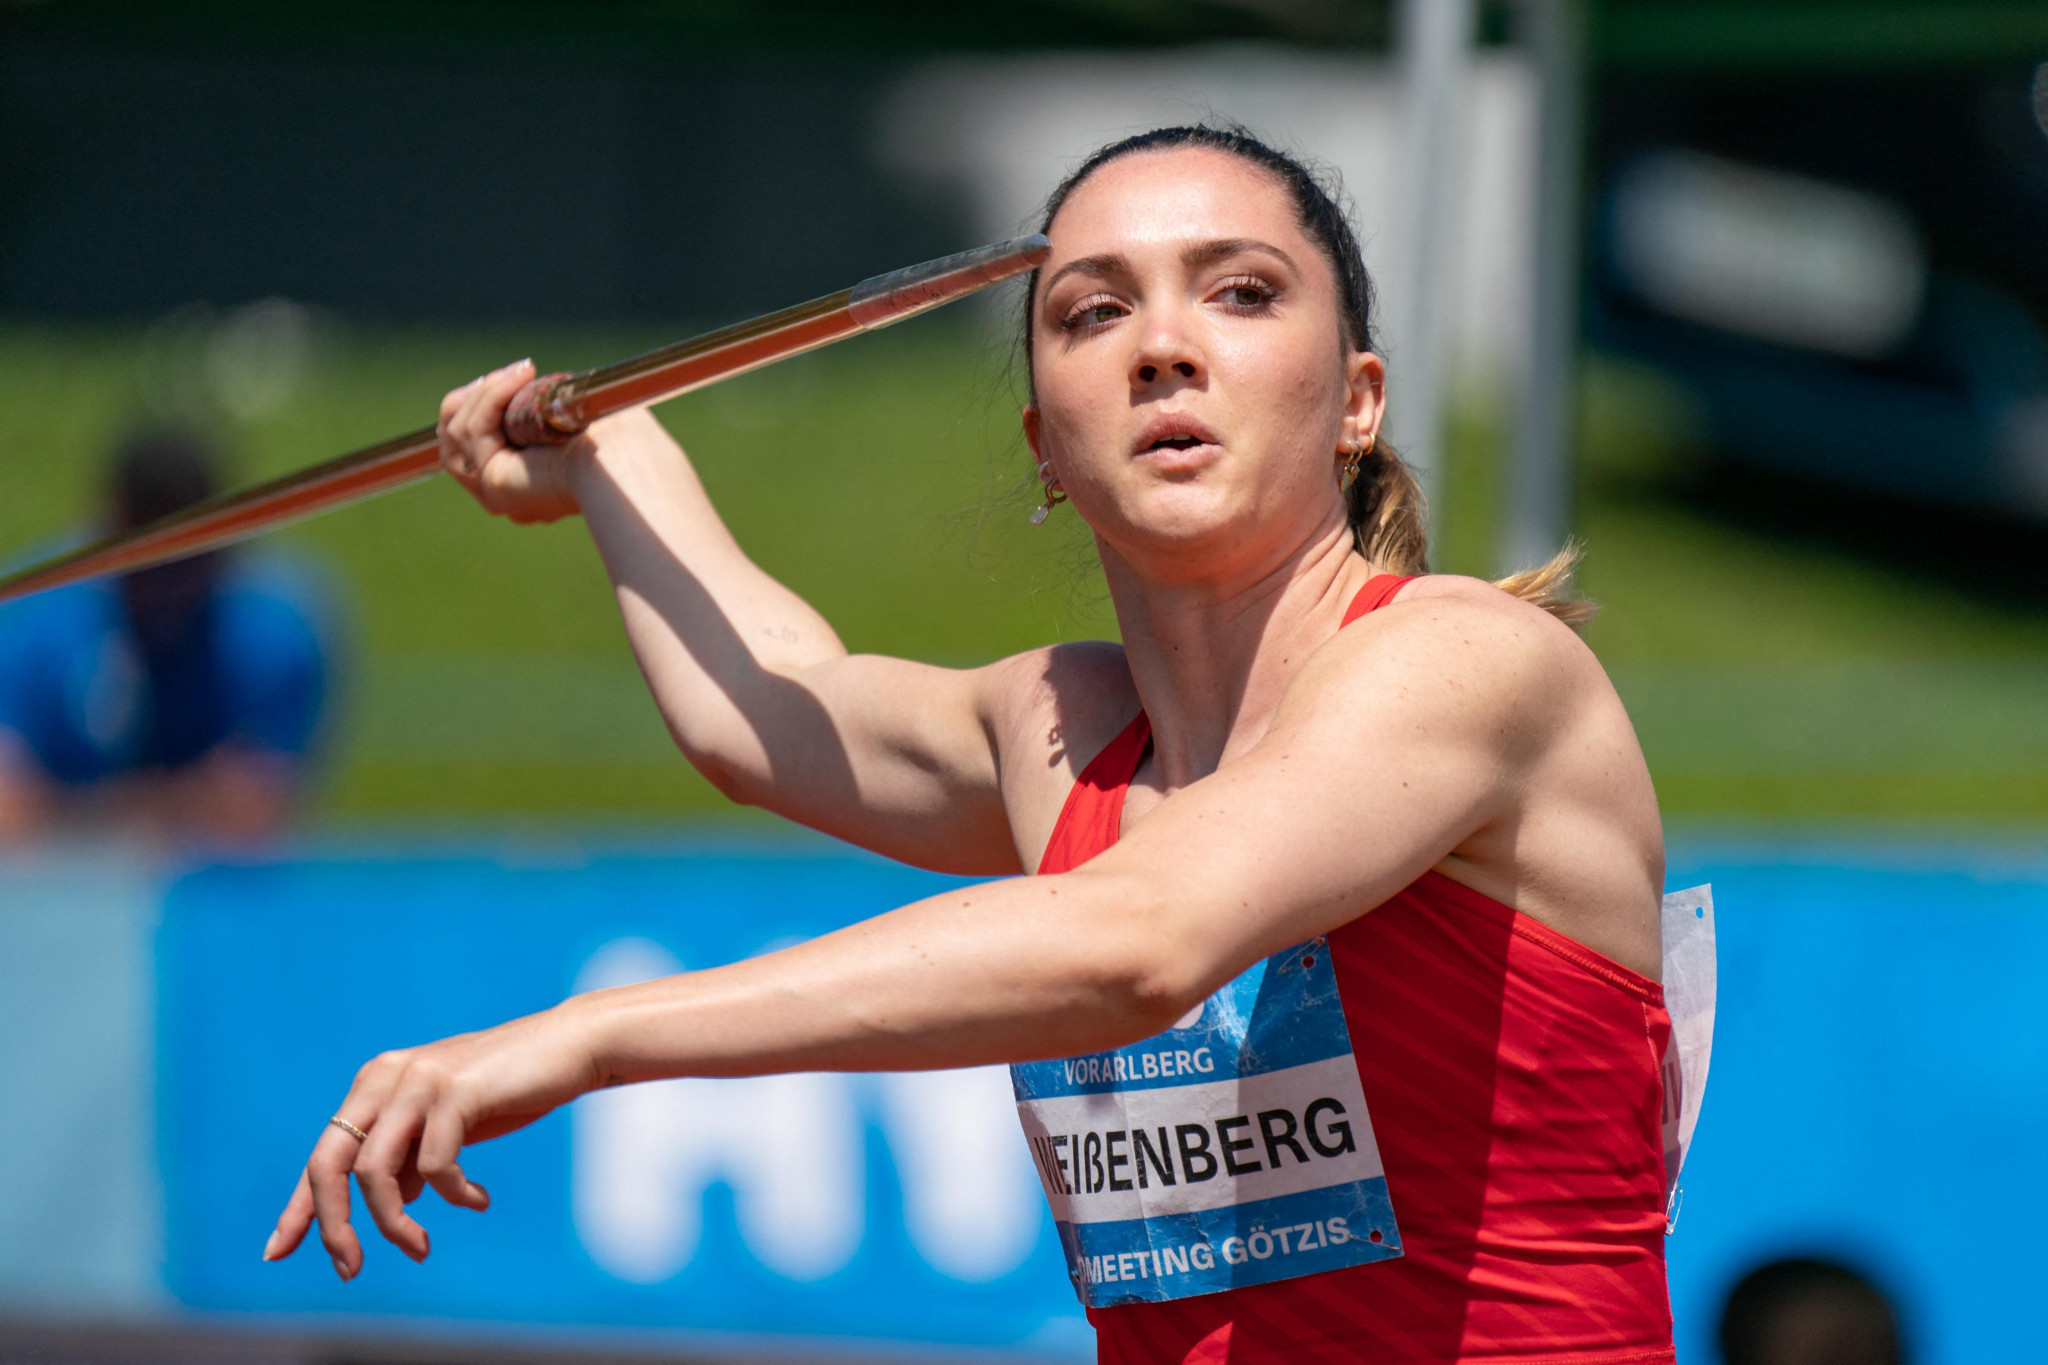 Sophie Weissenberg of Germany came out on top in the javelin on her way to winning the women's decathlon event in Ratingen ©Getty Images